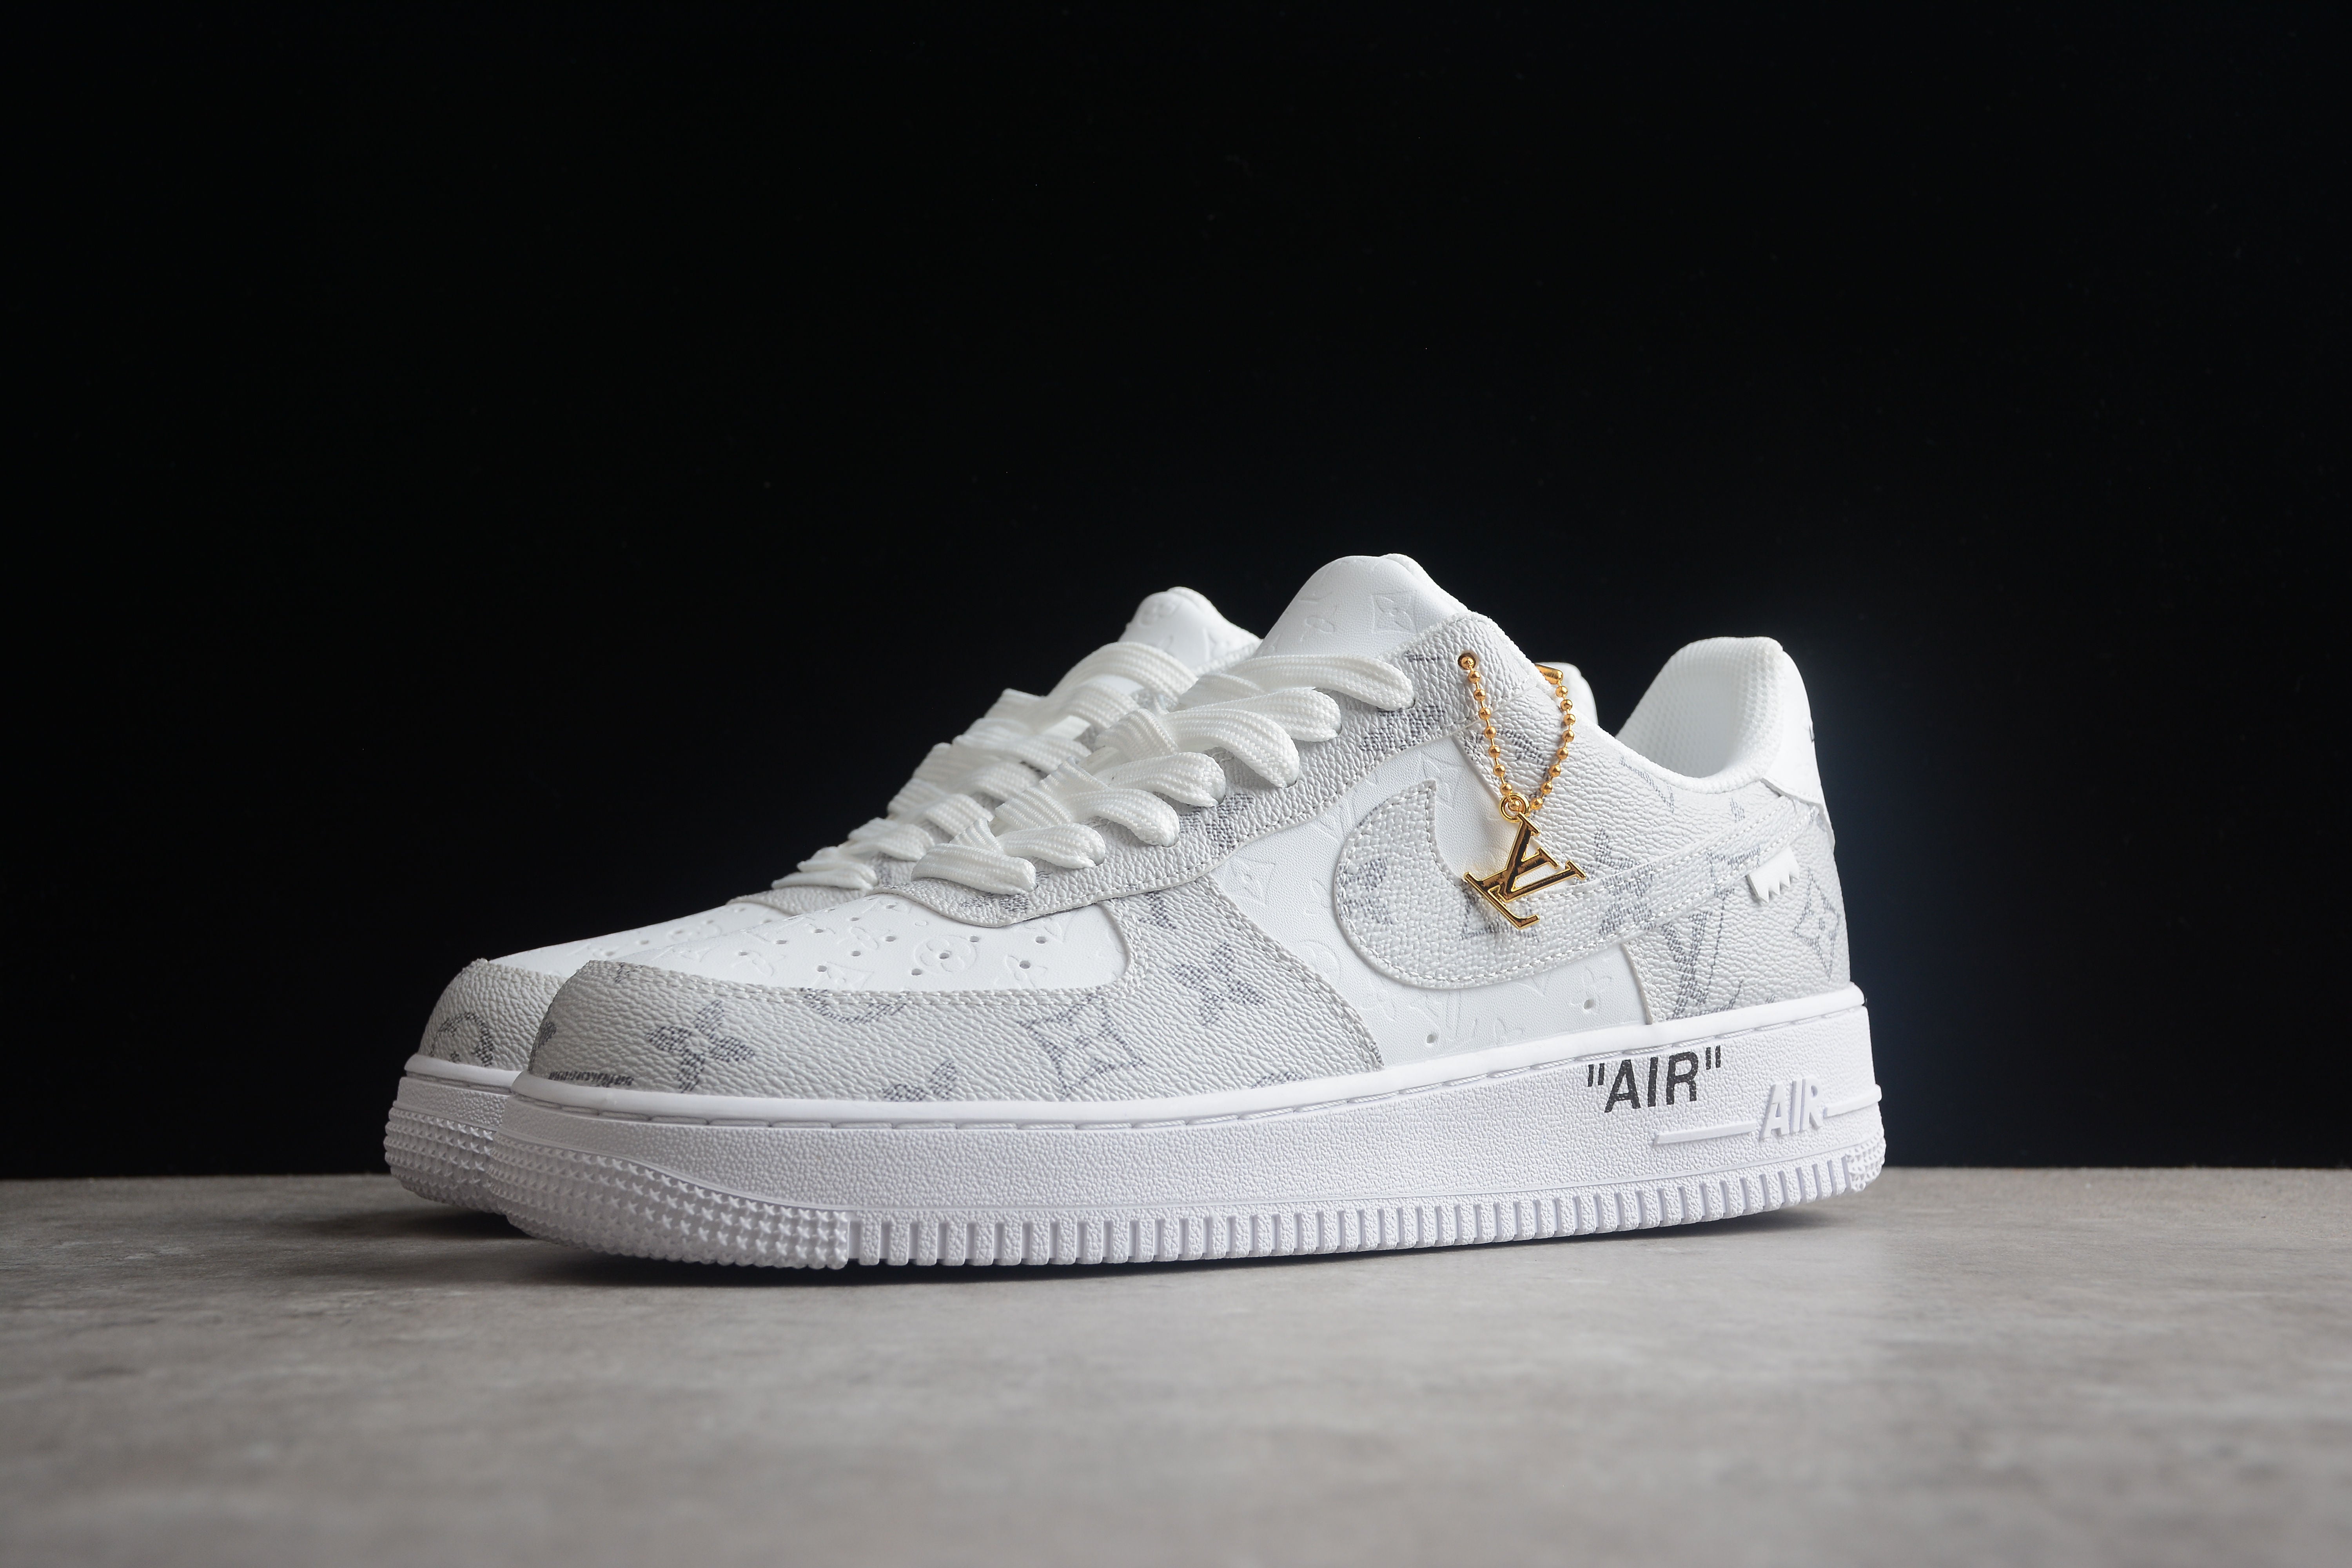 Nike airforce A1 grey LV shoes